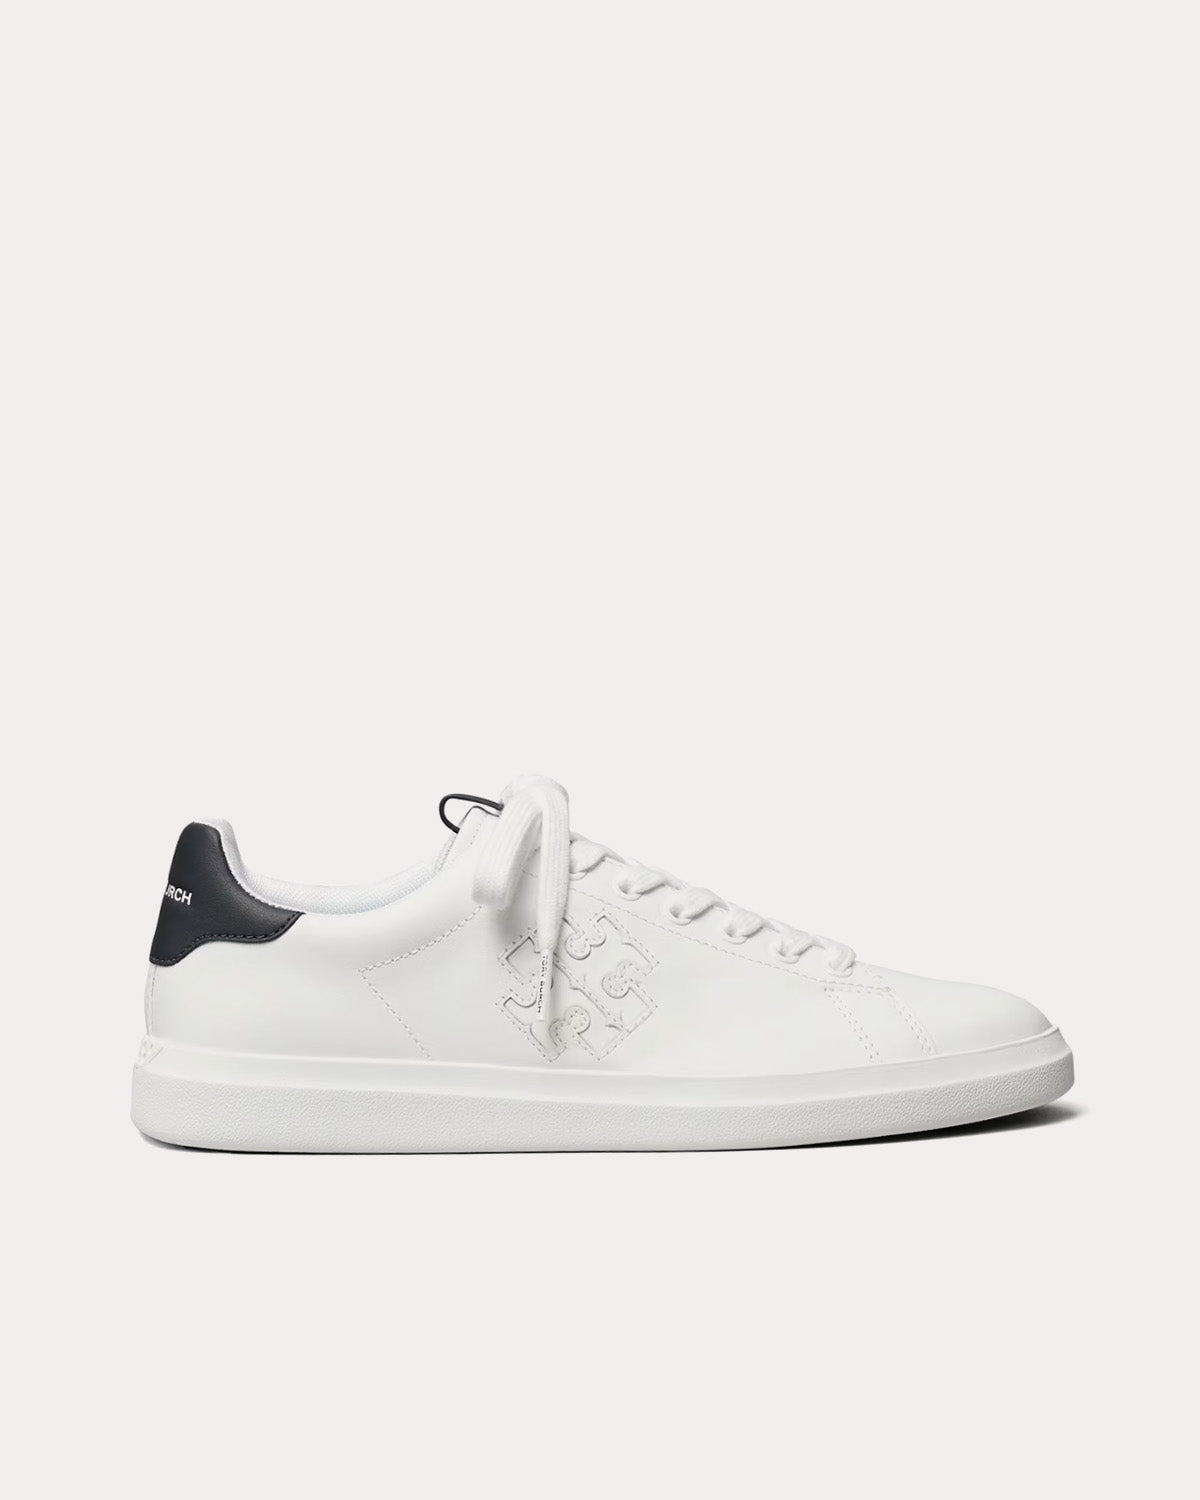 Tory Burch - Double T Howell Court White / Perfect Navy Low Top Sneakers